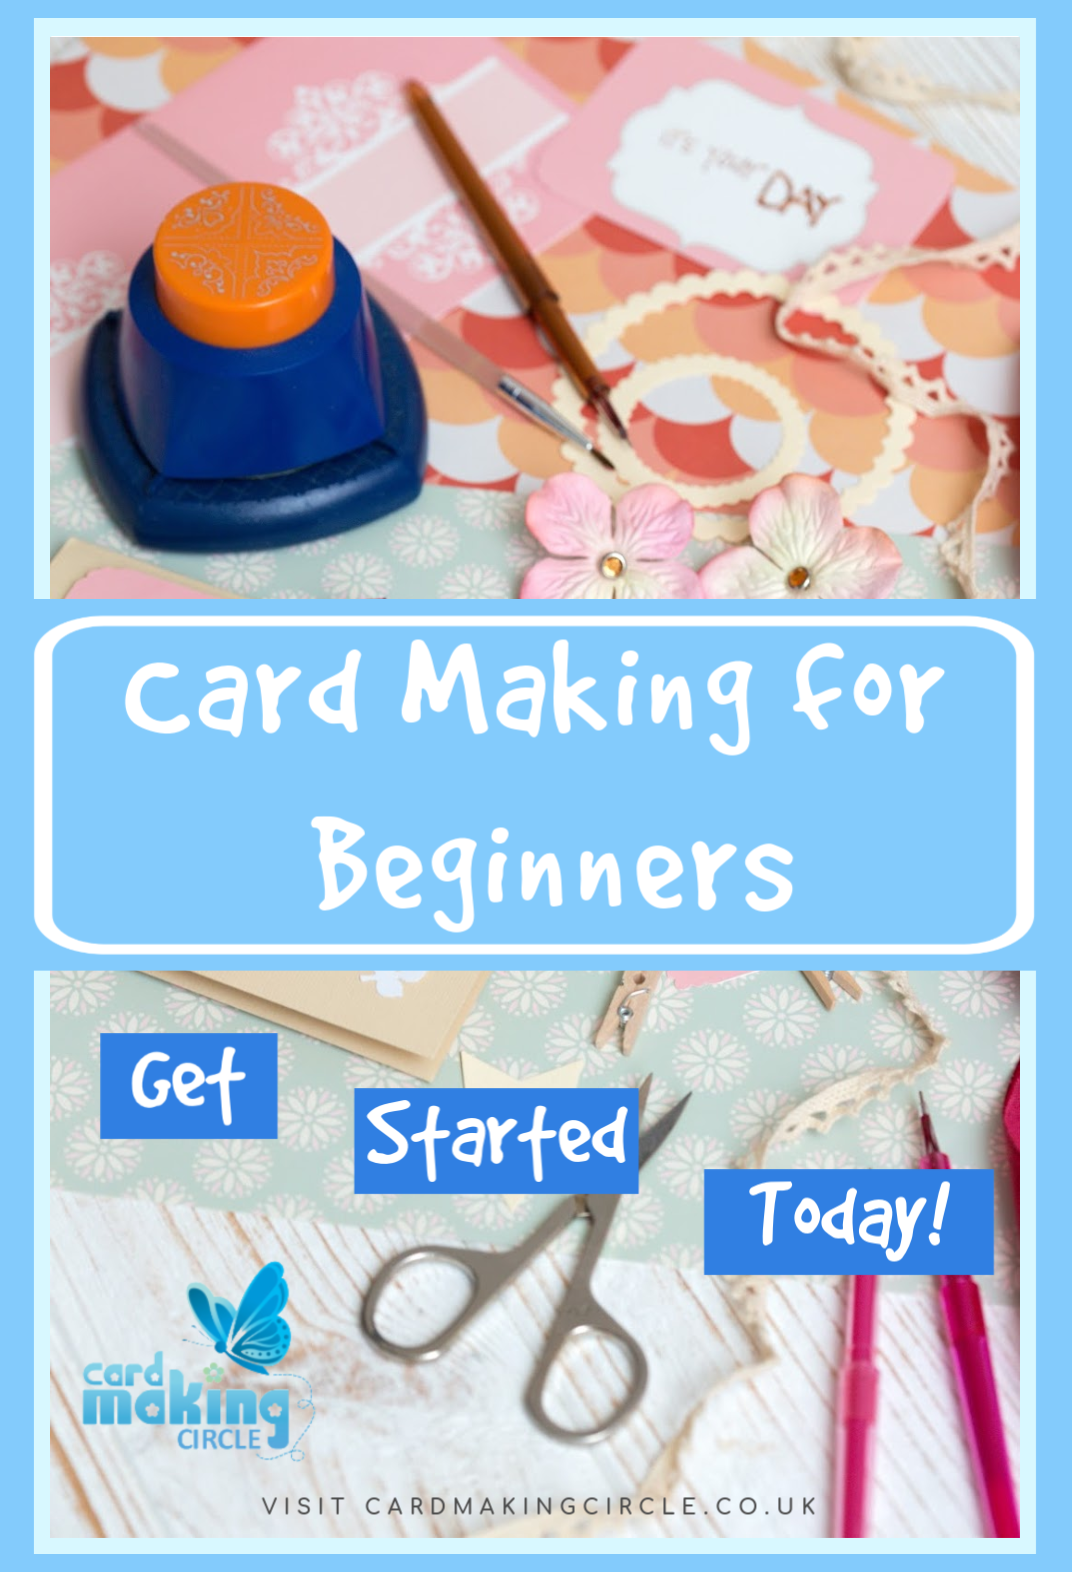 Interested in card making but not sure how to start? Join me and find out more with Card Making for Beginners.